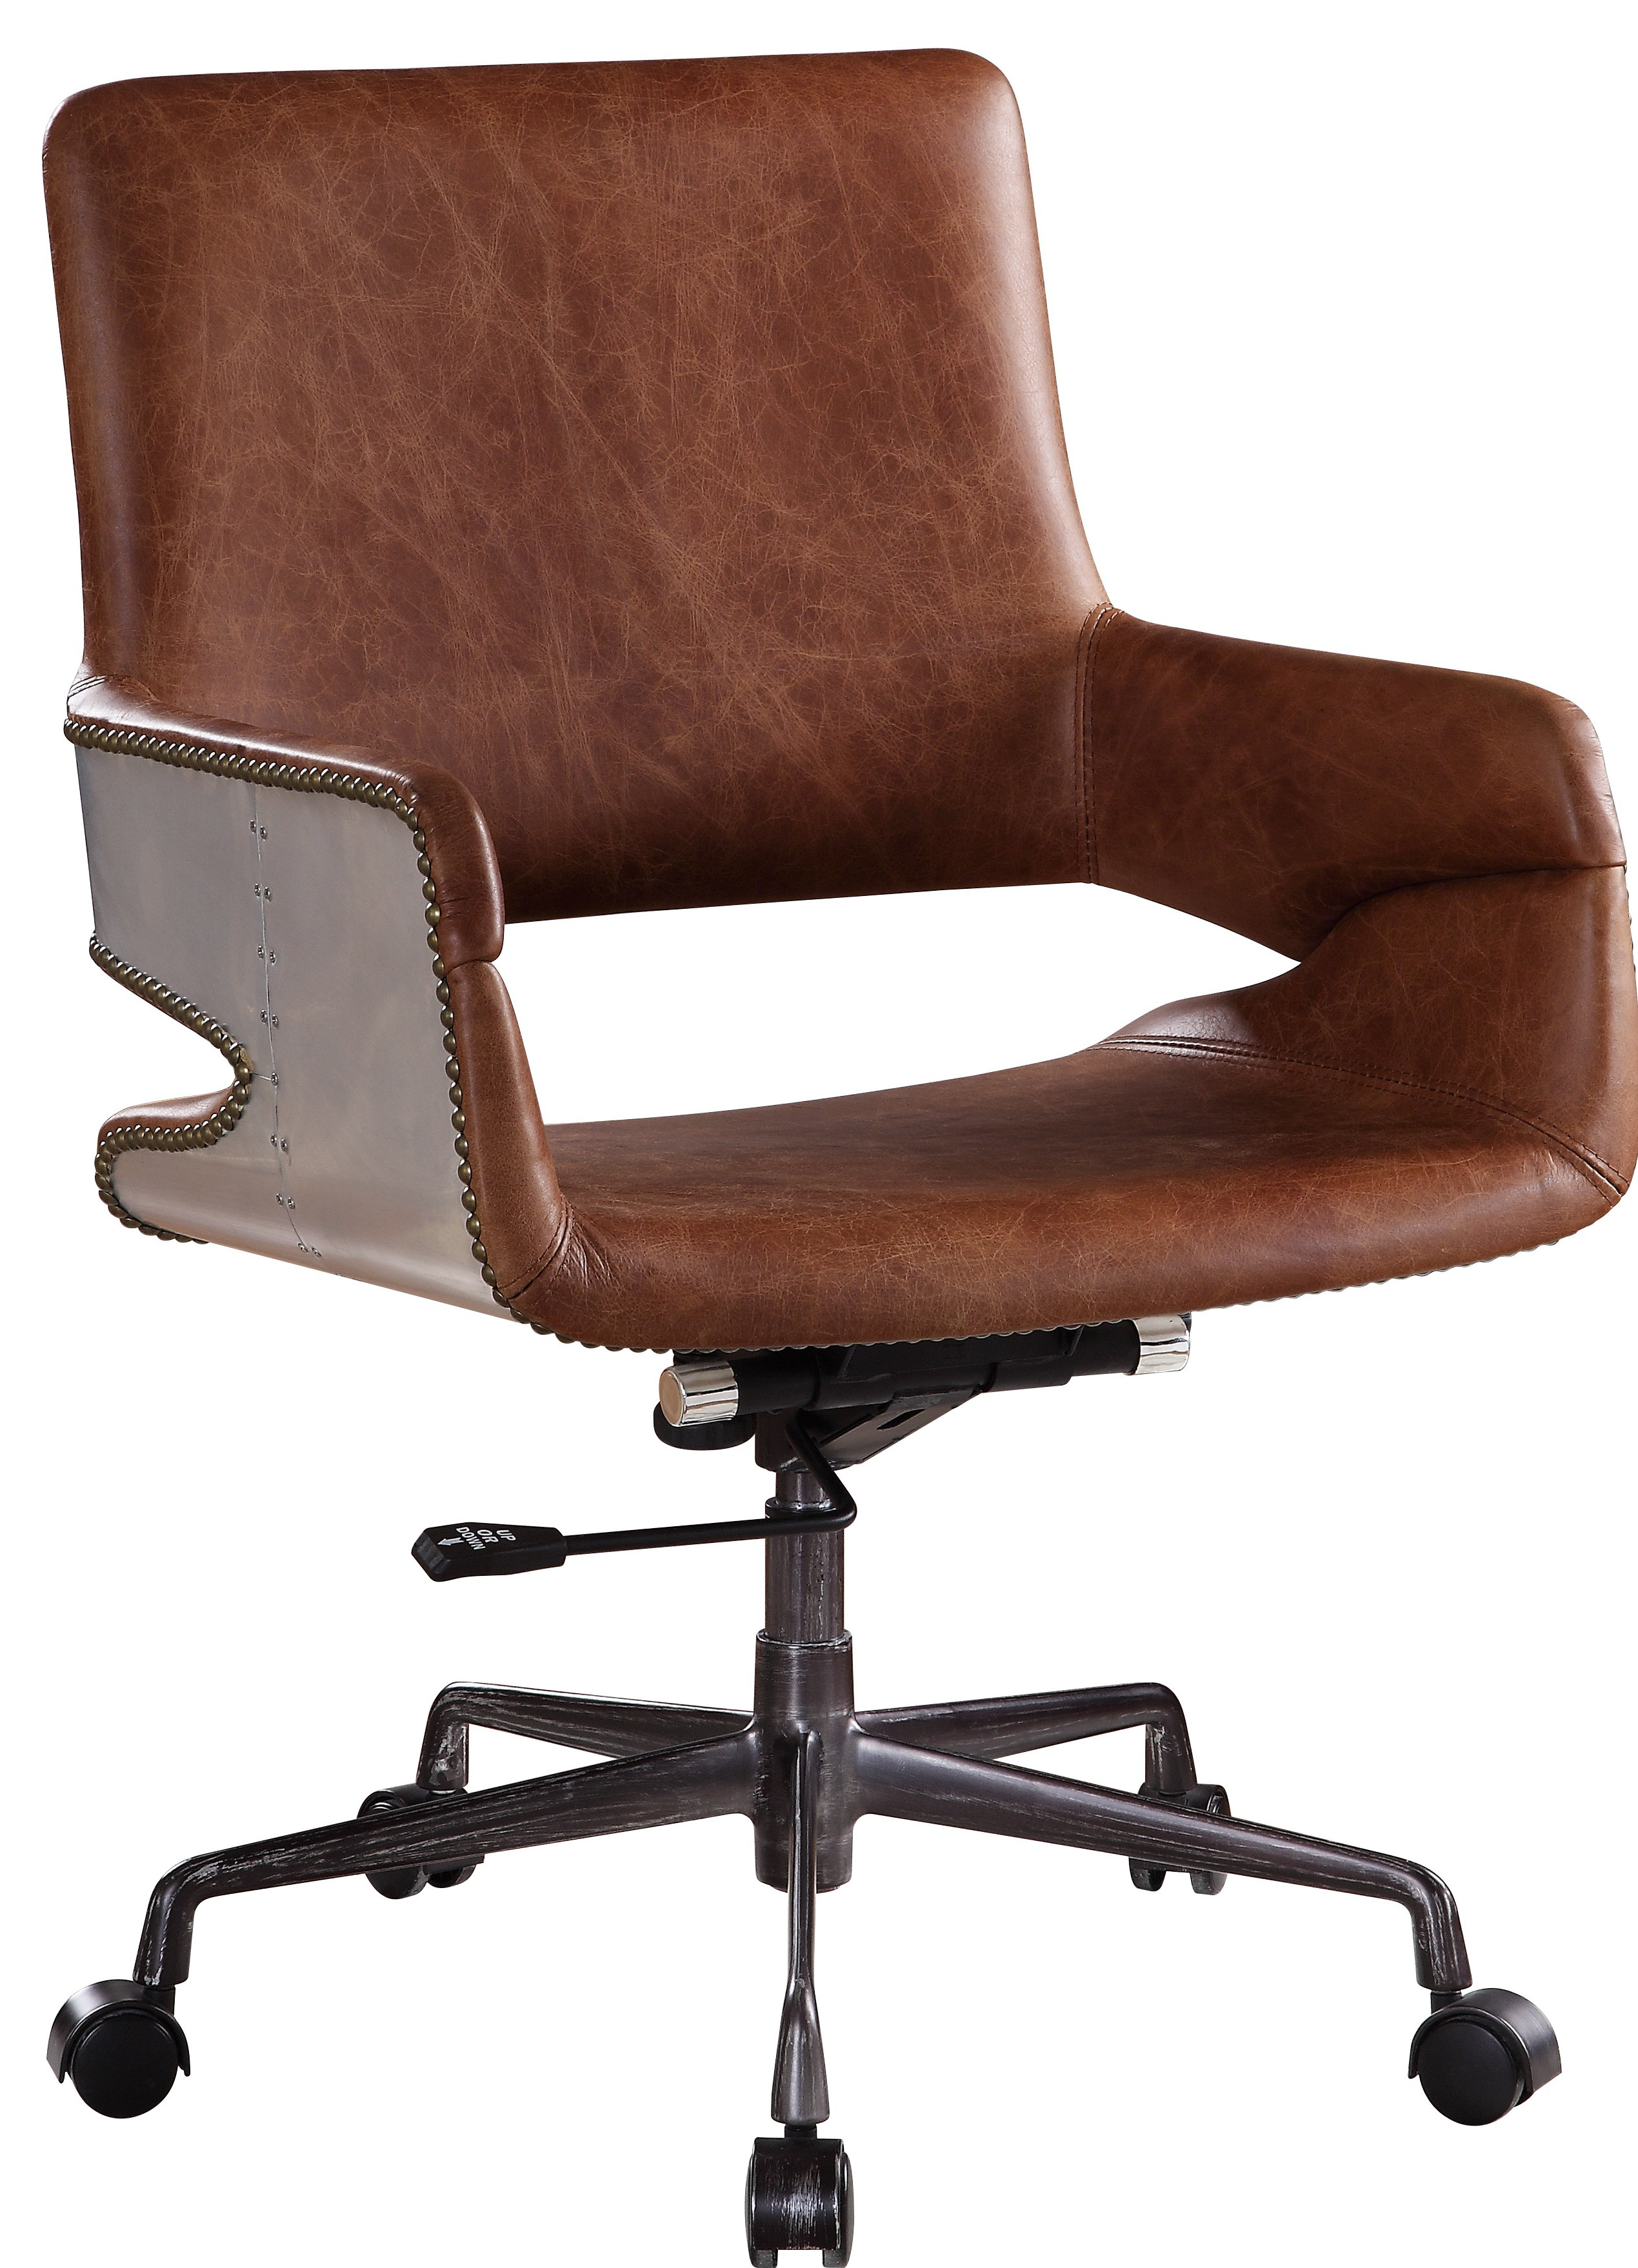 Evre High Back Curved Office Desk Chair in Black Faux Leather /& Chrome Finish